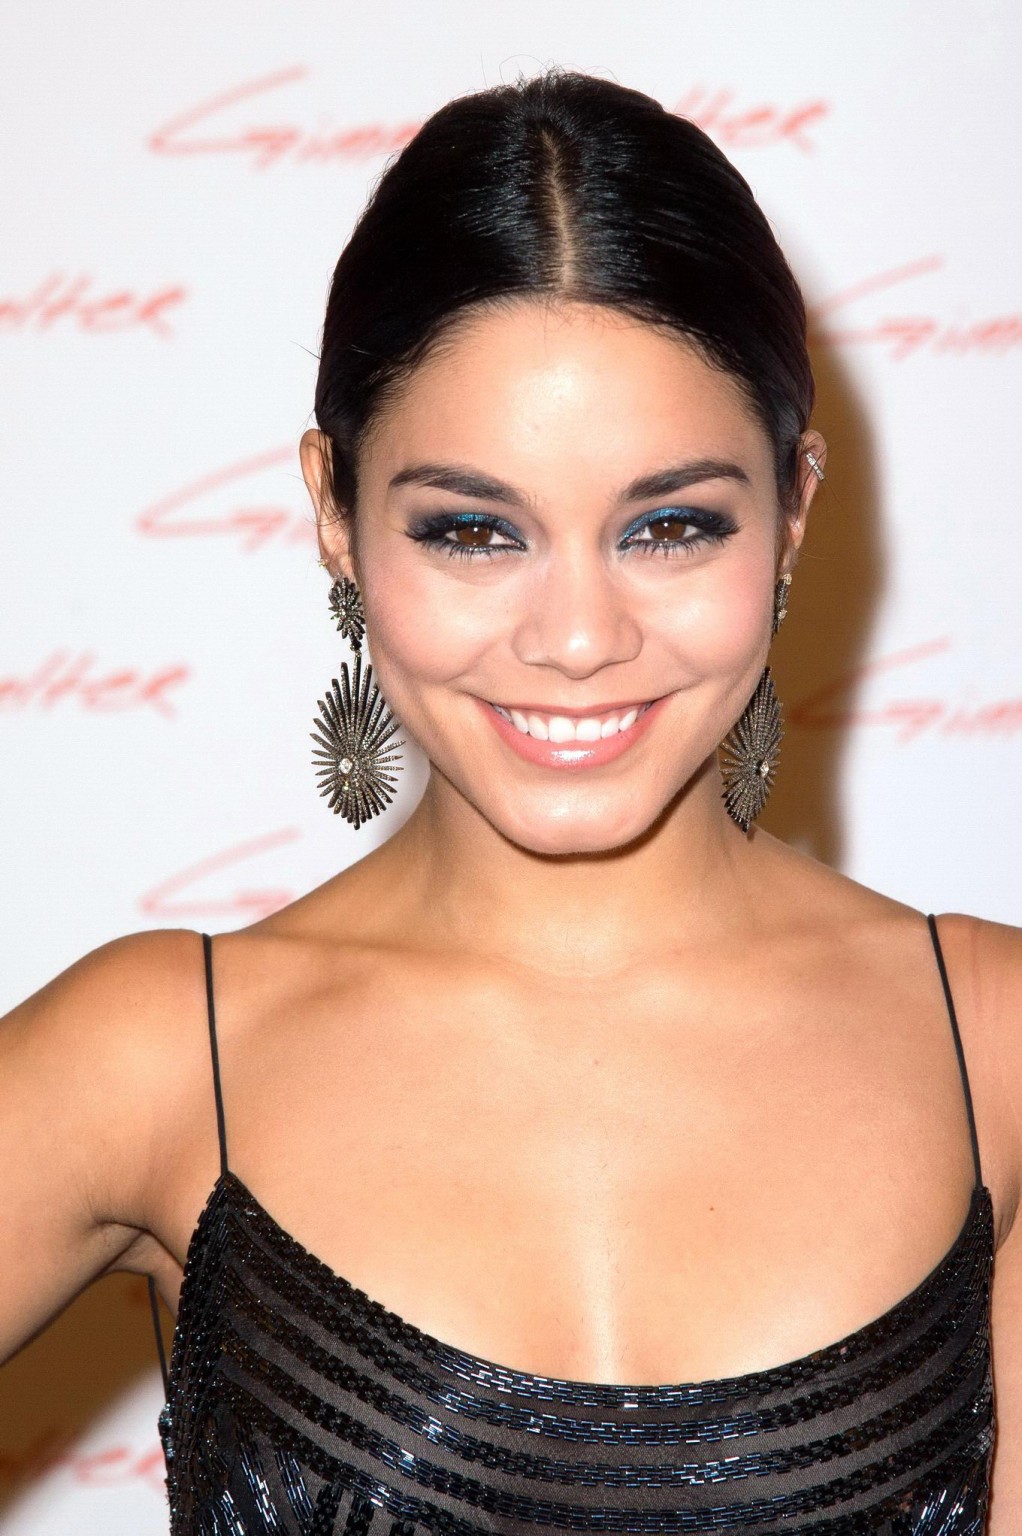 Vanessa Hudgens braless wearing a low cut maxi dress at Gimme Shelter premiere i #75182608